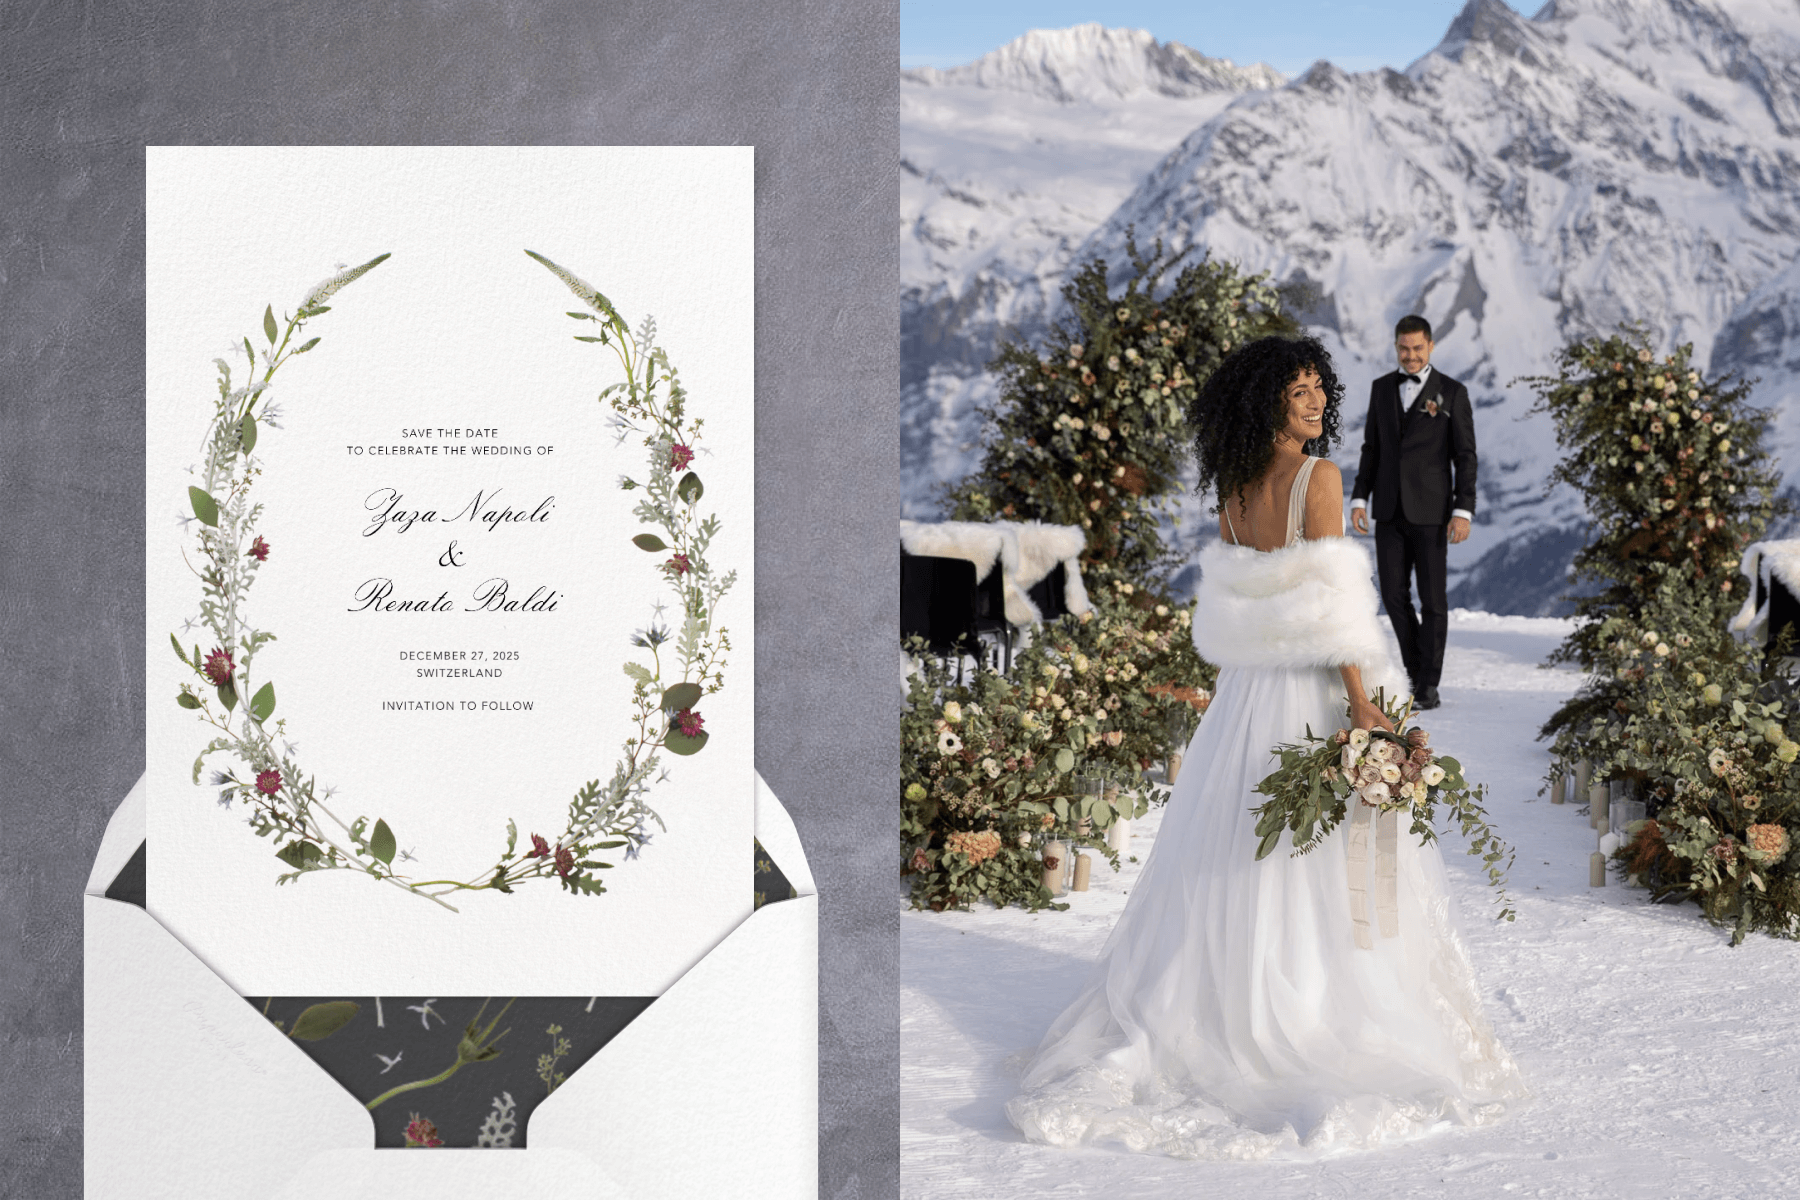 A save the date with a delicate floral wreath border; a bride and groom stand at a floral altar in a snowy mountain scene.